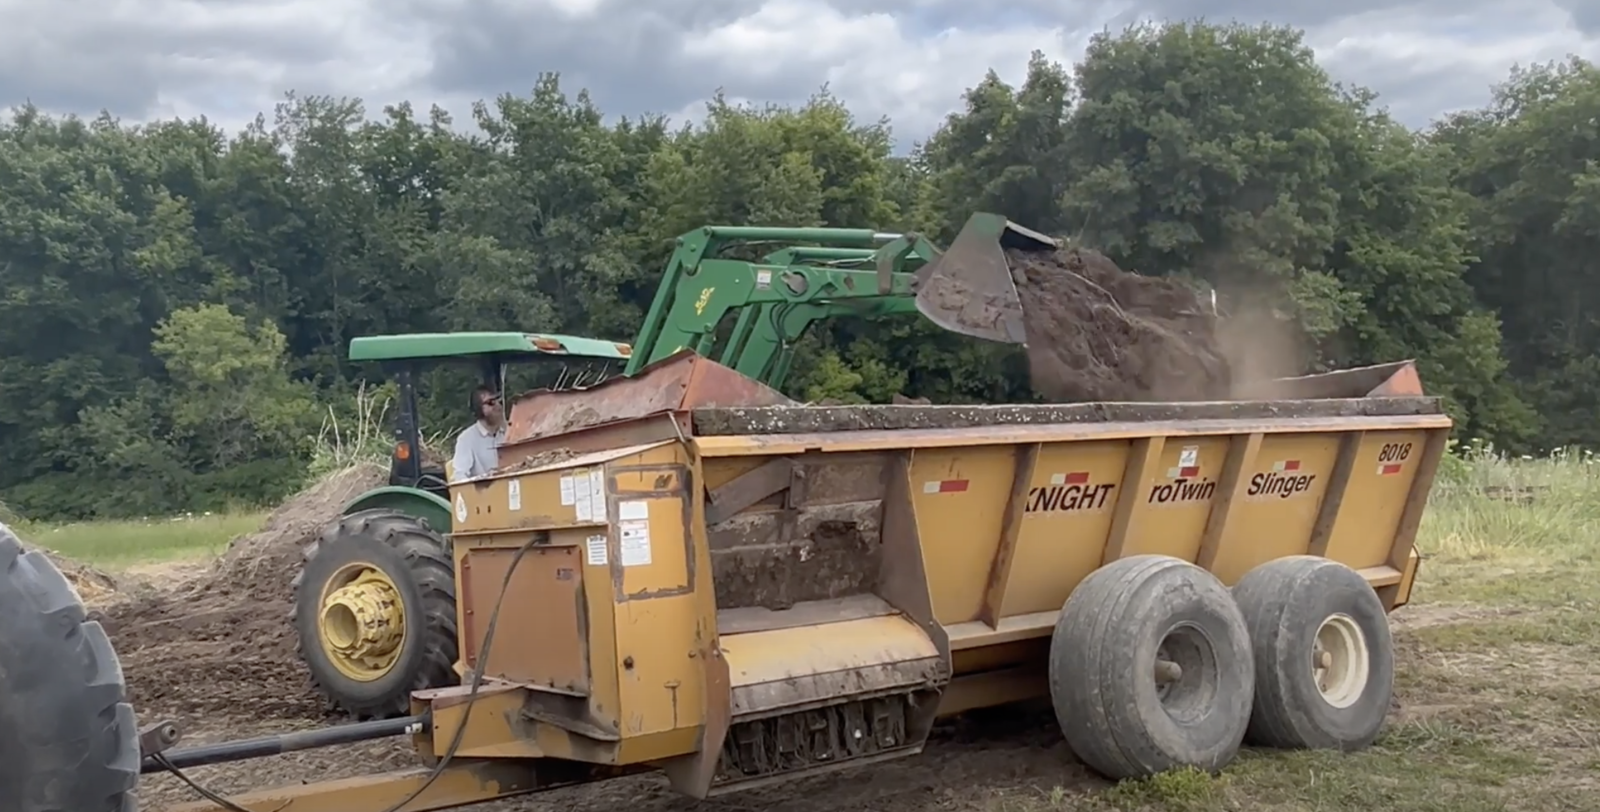 A green tractor dumps dirt-like compost into a large trailer